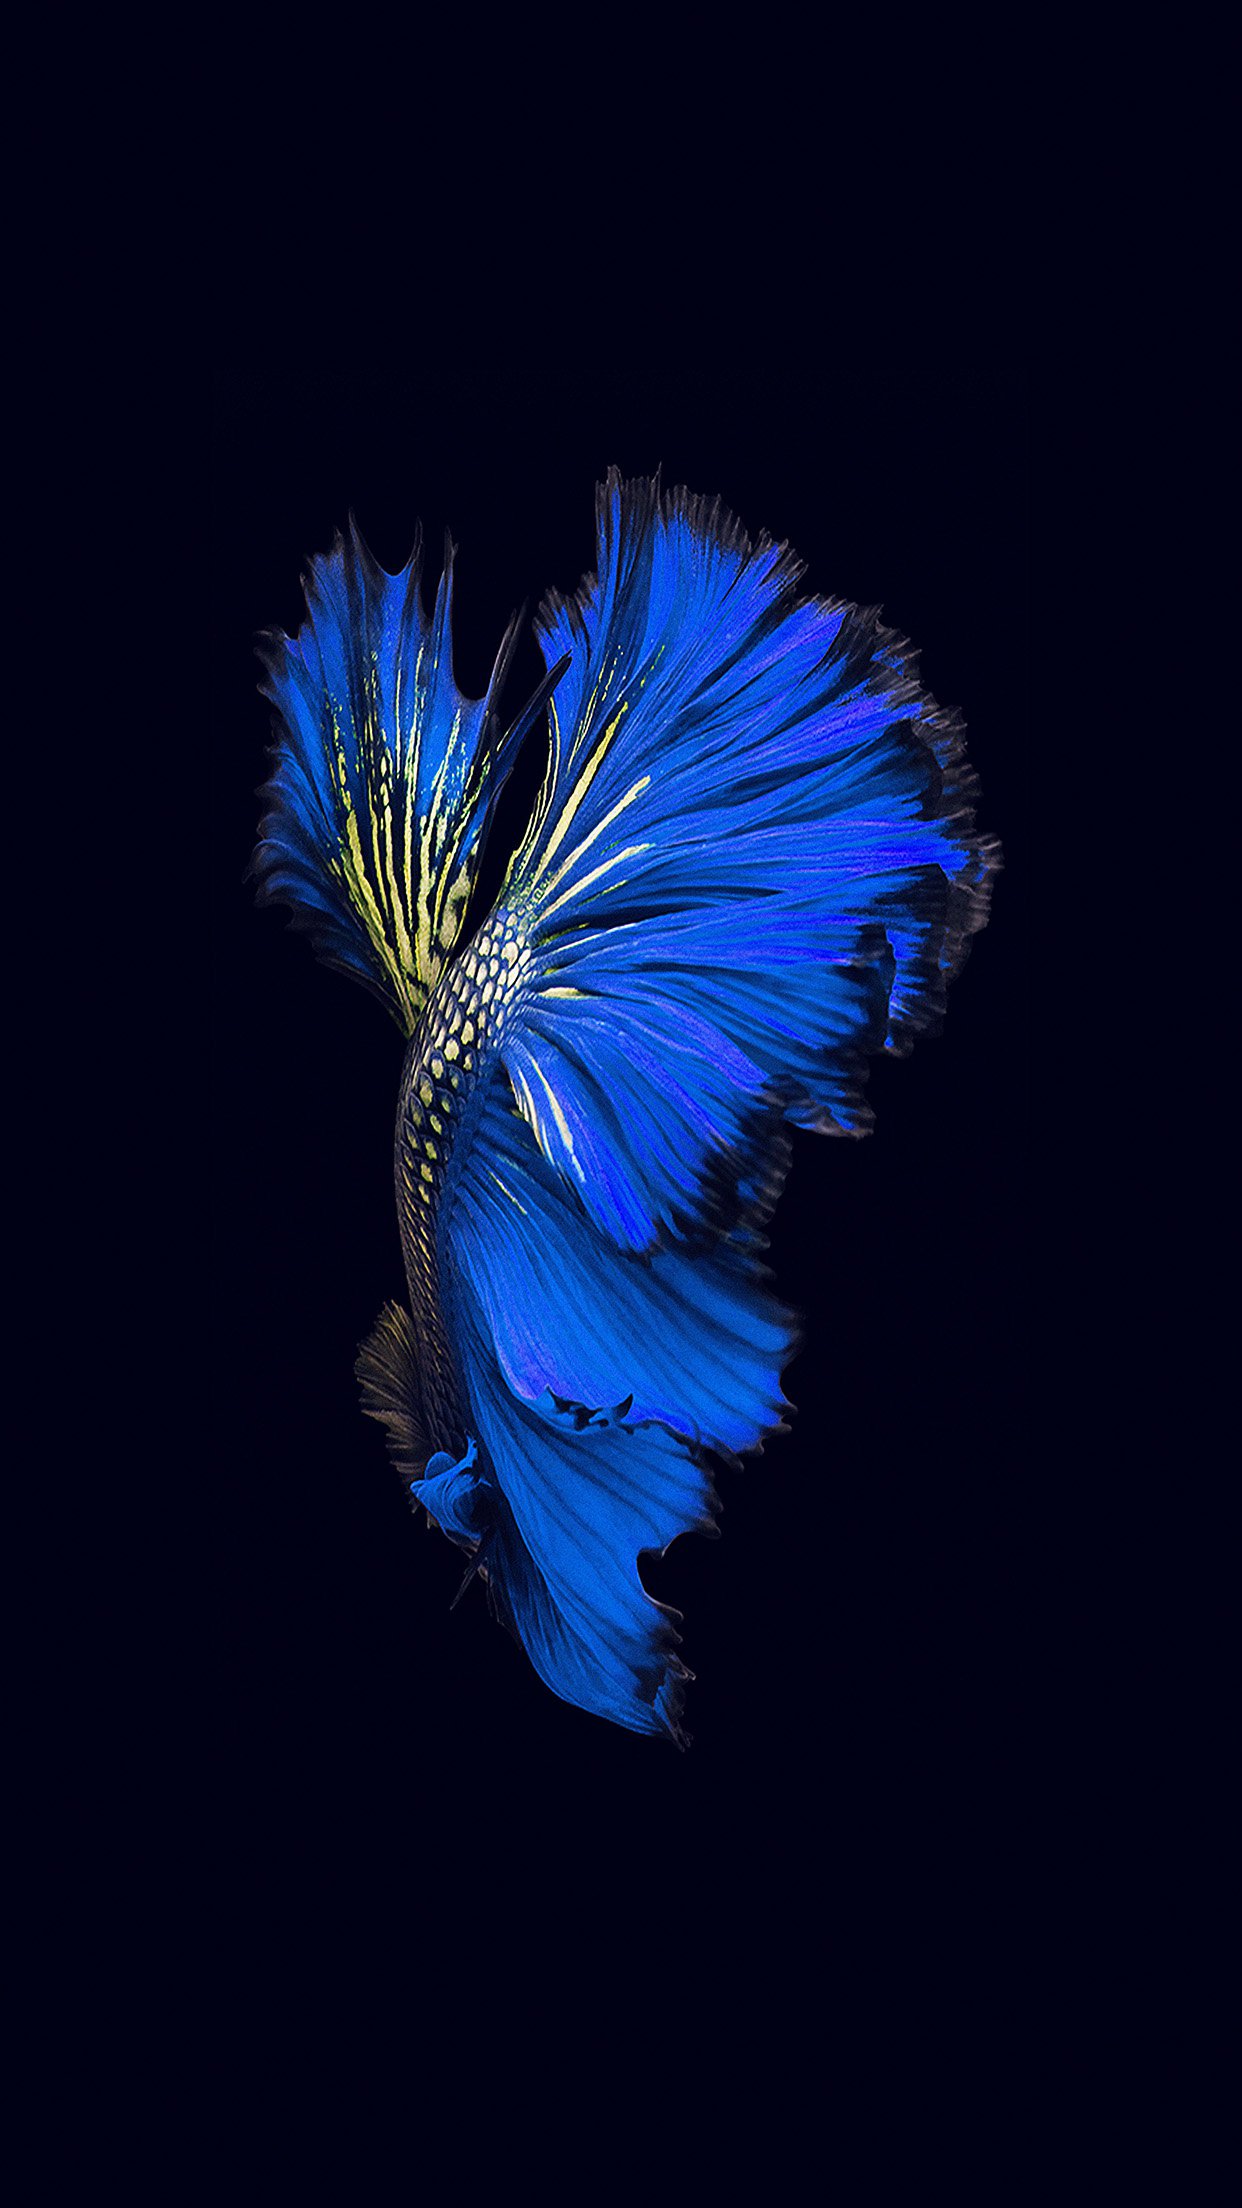 Apple IOS9 Fish Live Background Dark Blue Android wallpaper